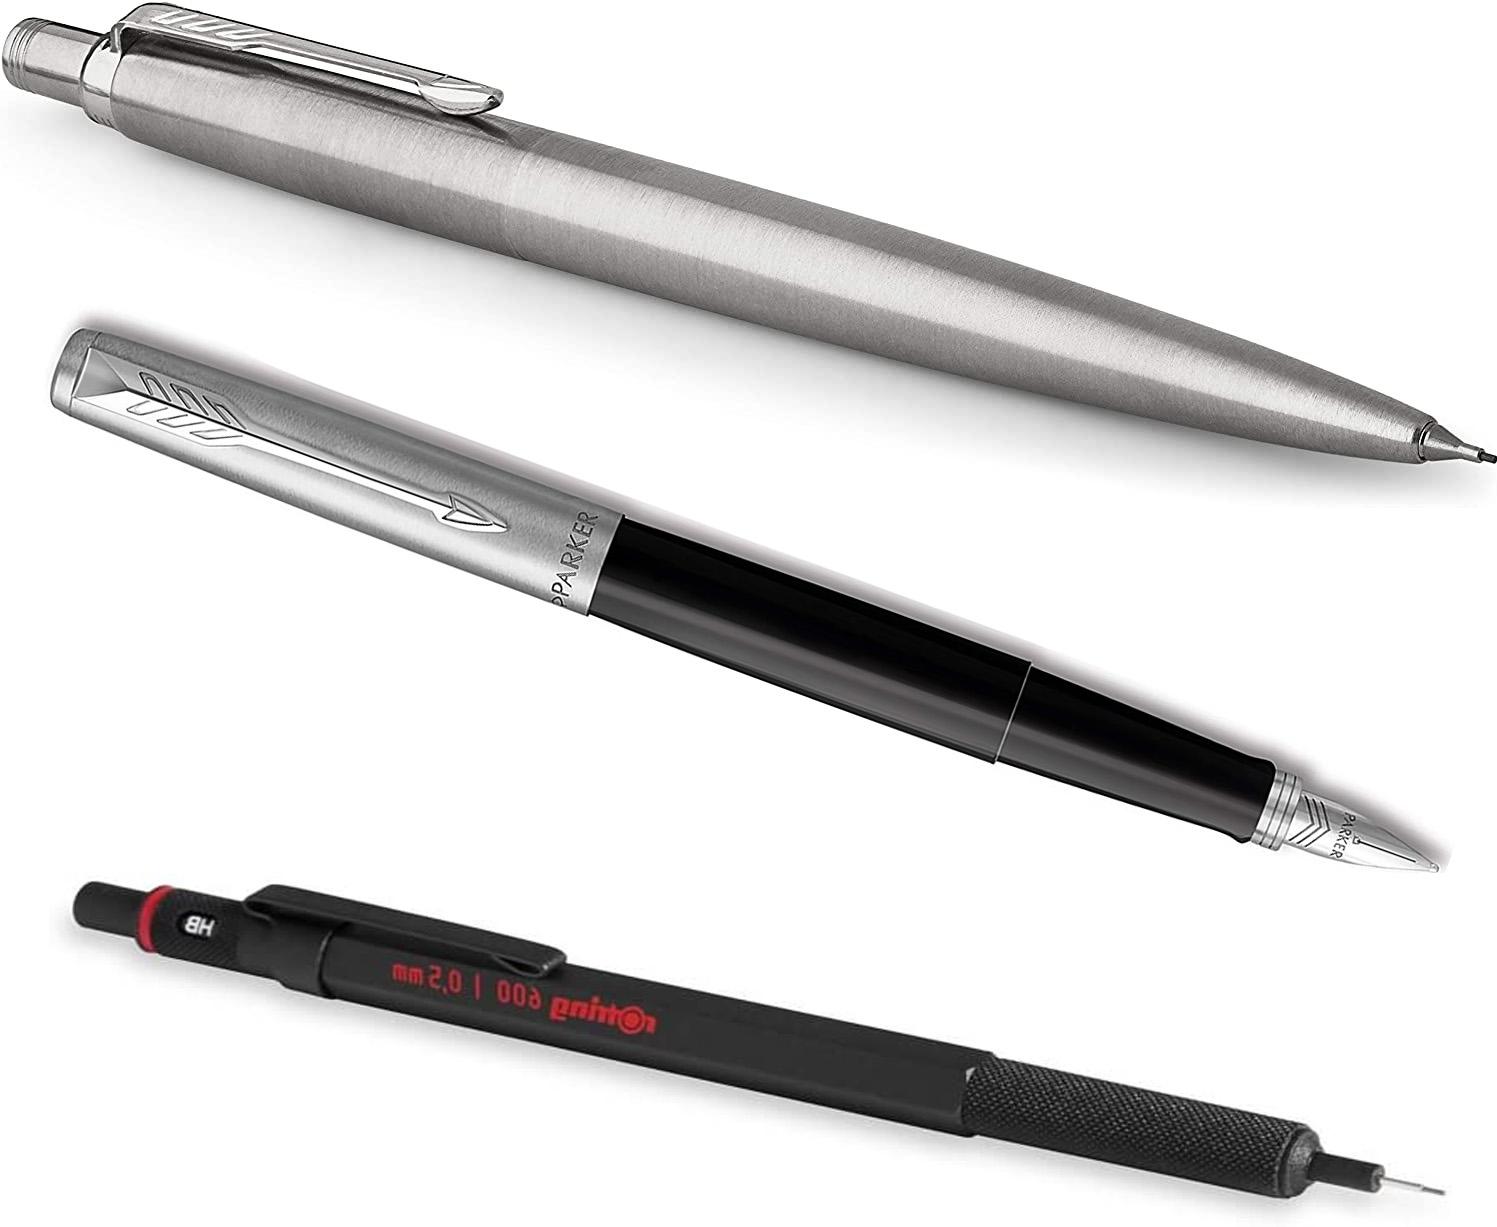 Parker Mechanical Pencil + Fountain Pen + rOtring 600 Pencil for $30.49 Shipped